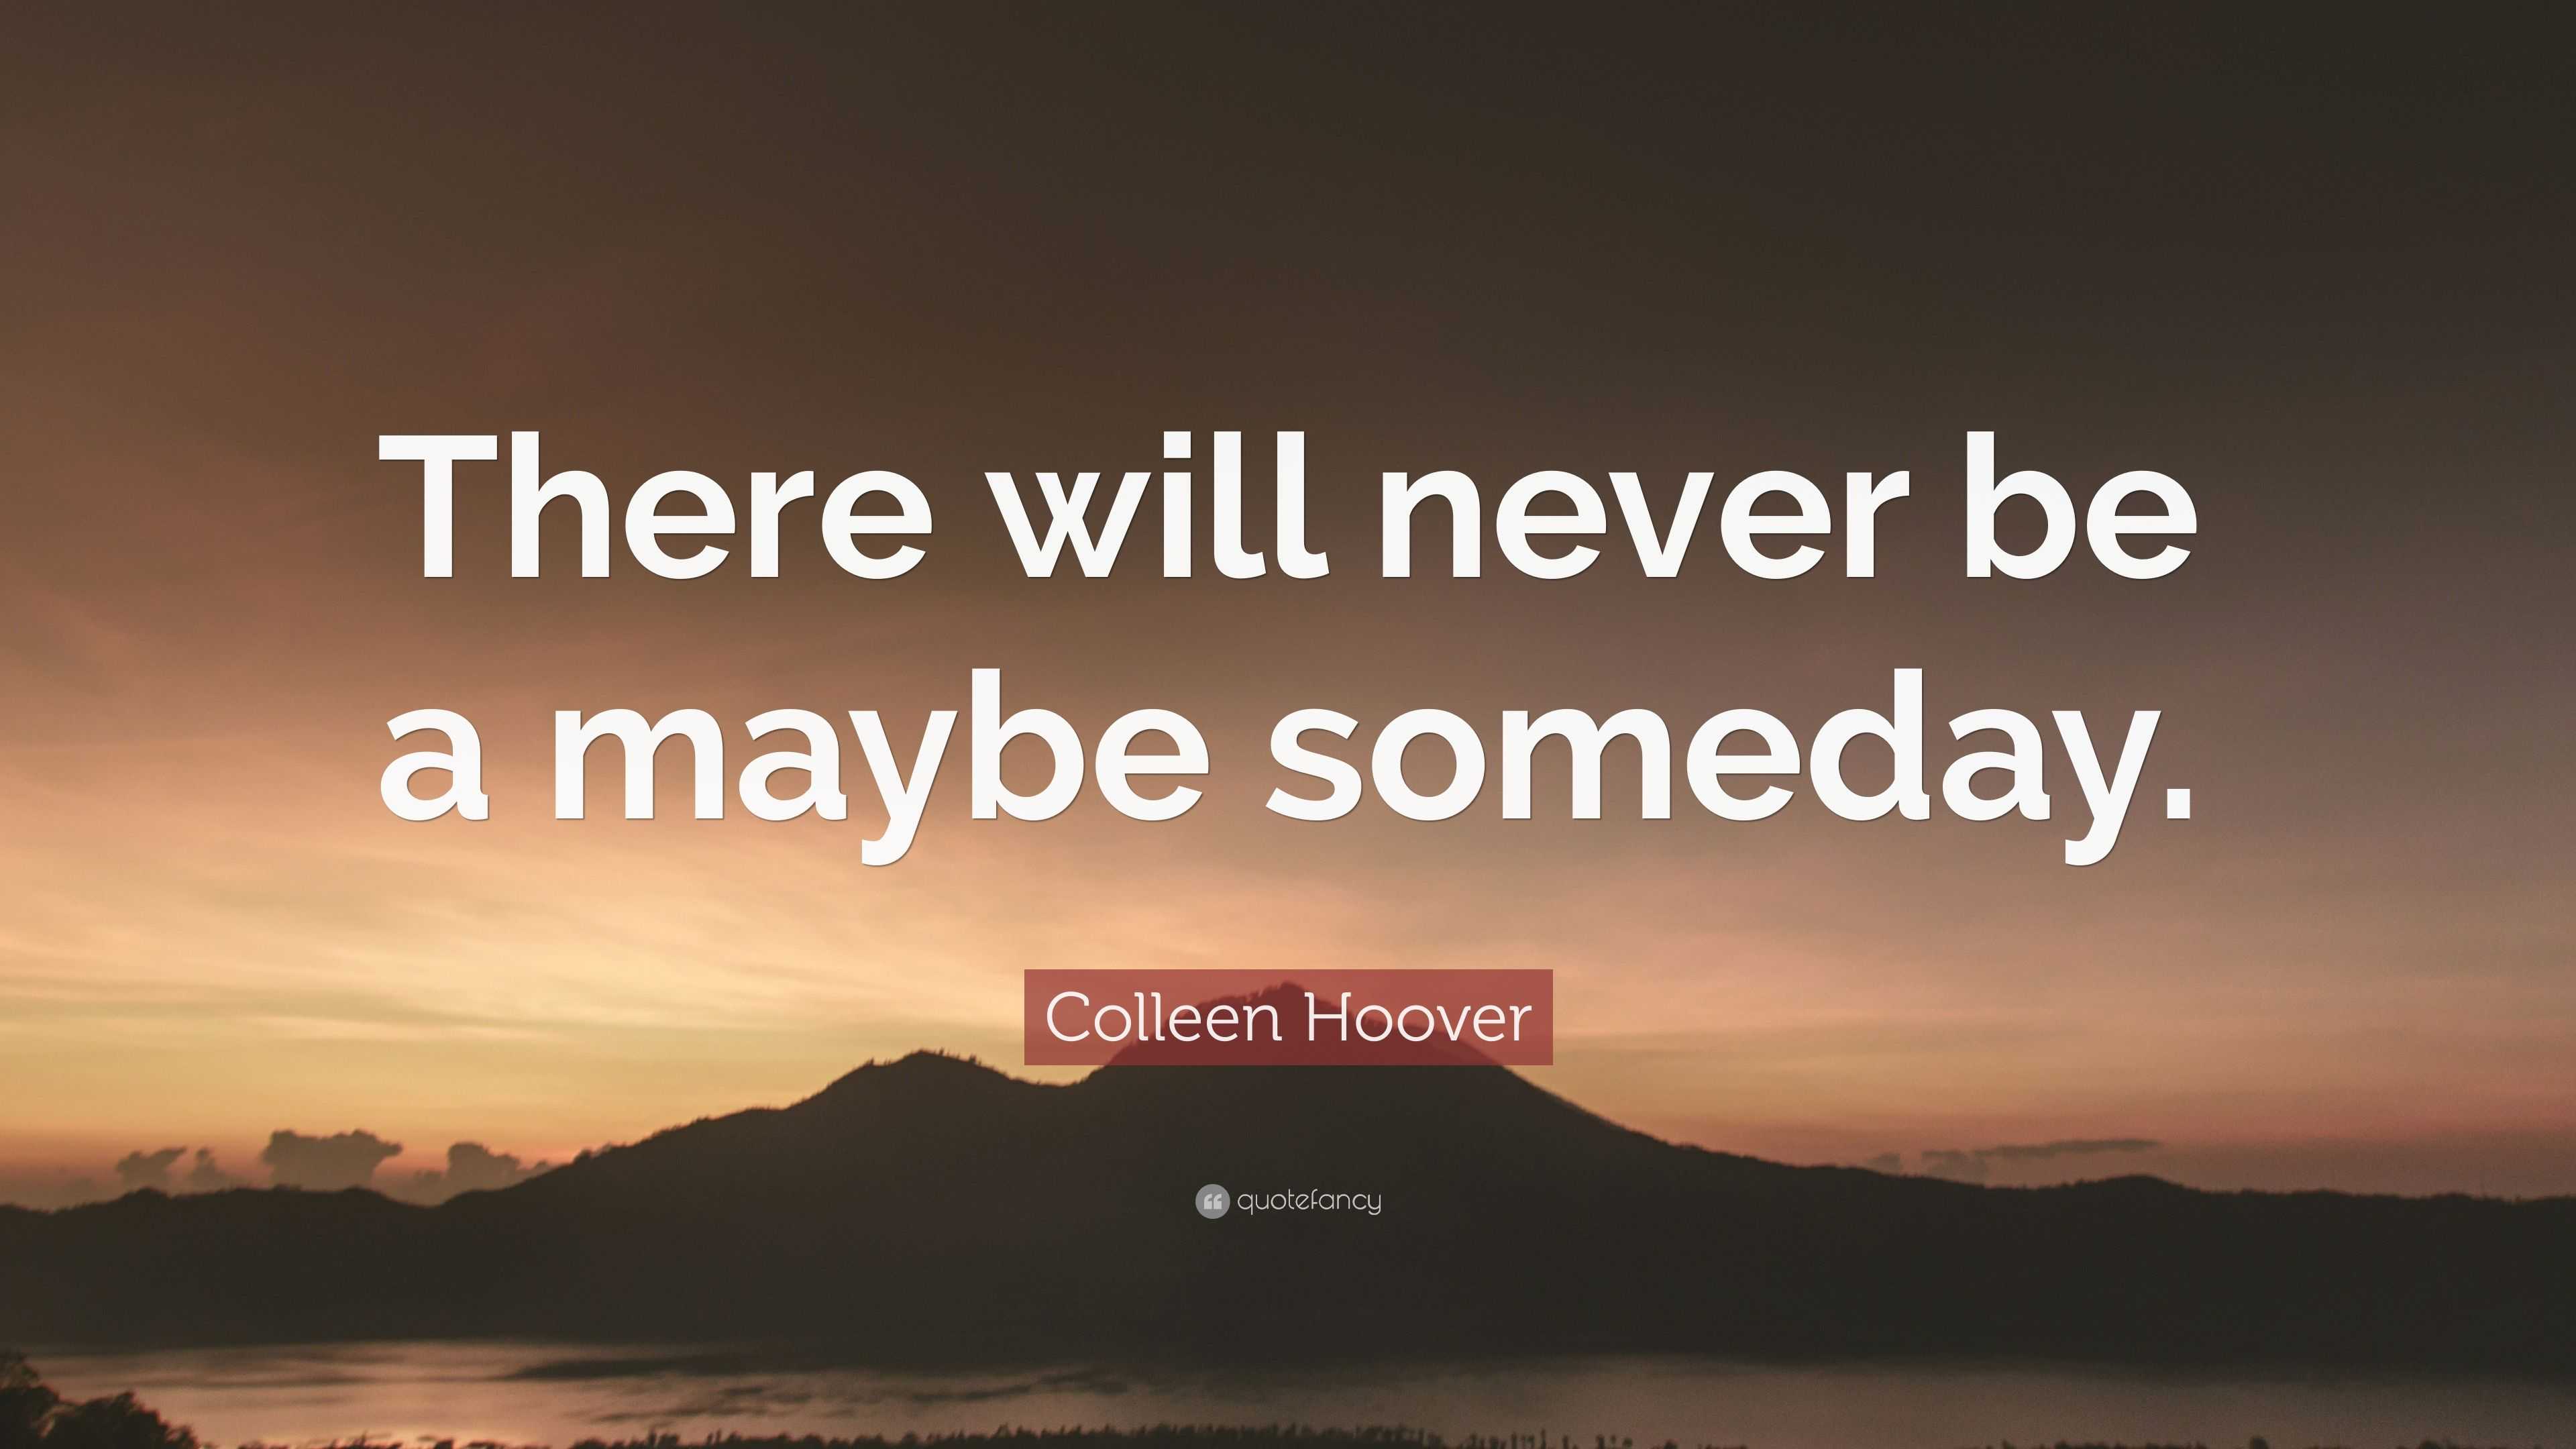 Colleen Hoover Quote: “There will never be a maybe someday.” (12